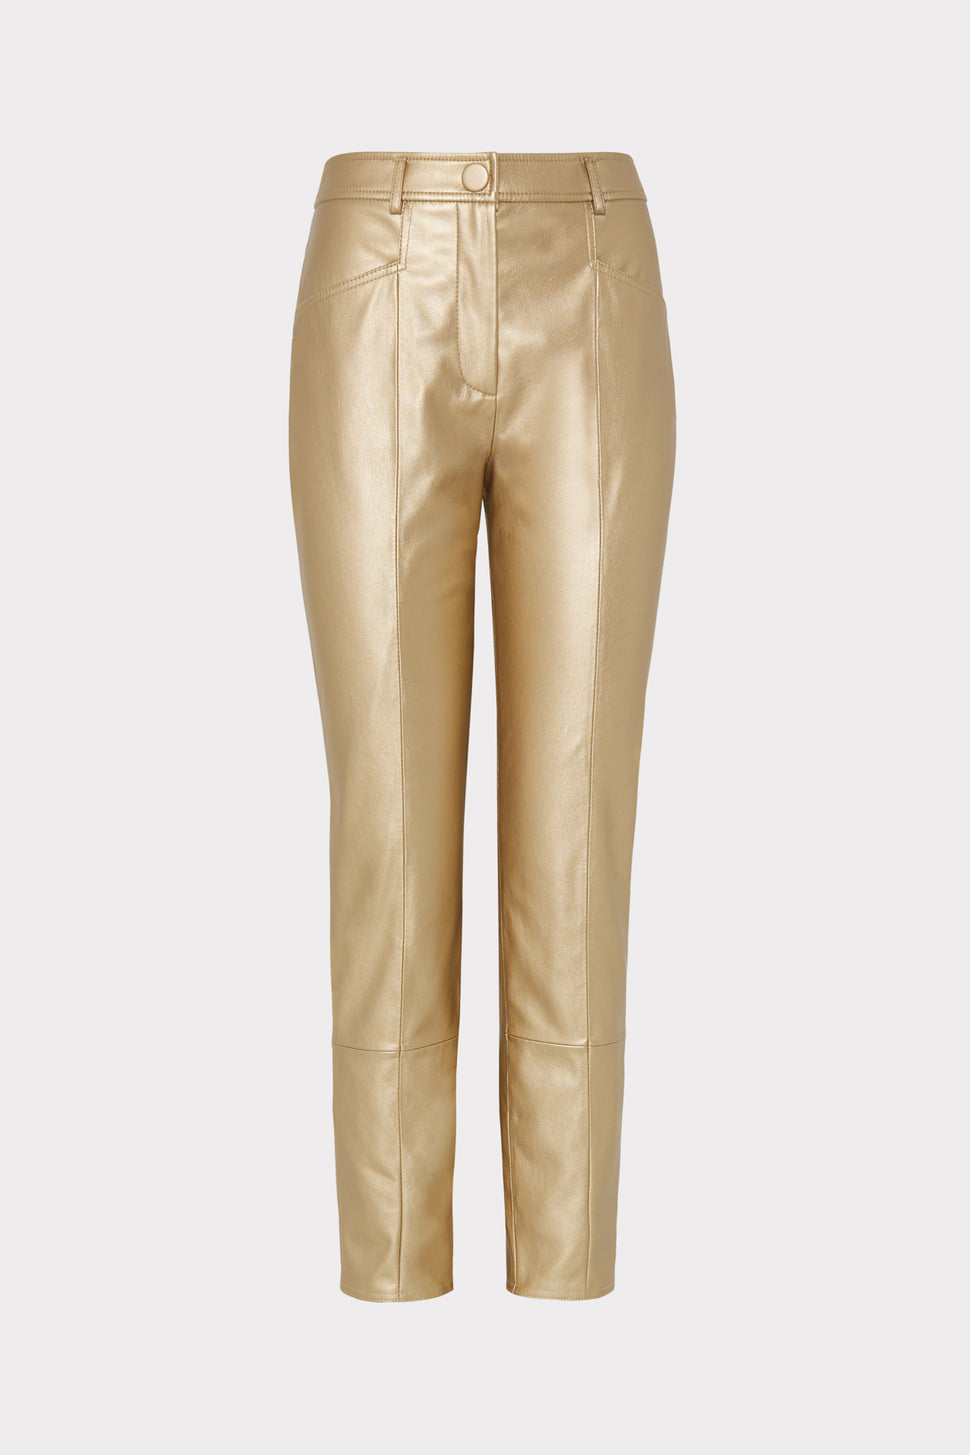 See and Be Seam High-Waisted Faux Leather Pants  Cream pants outfit,  Latest fashion clothes, White leather pants